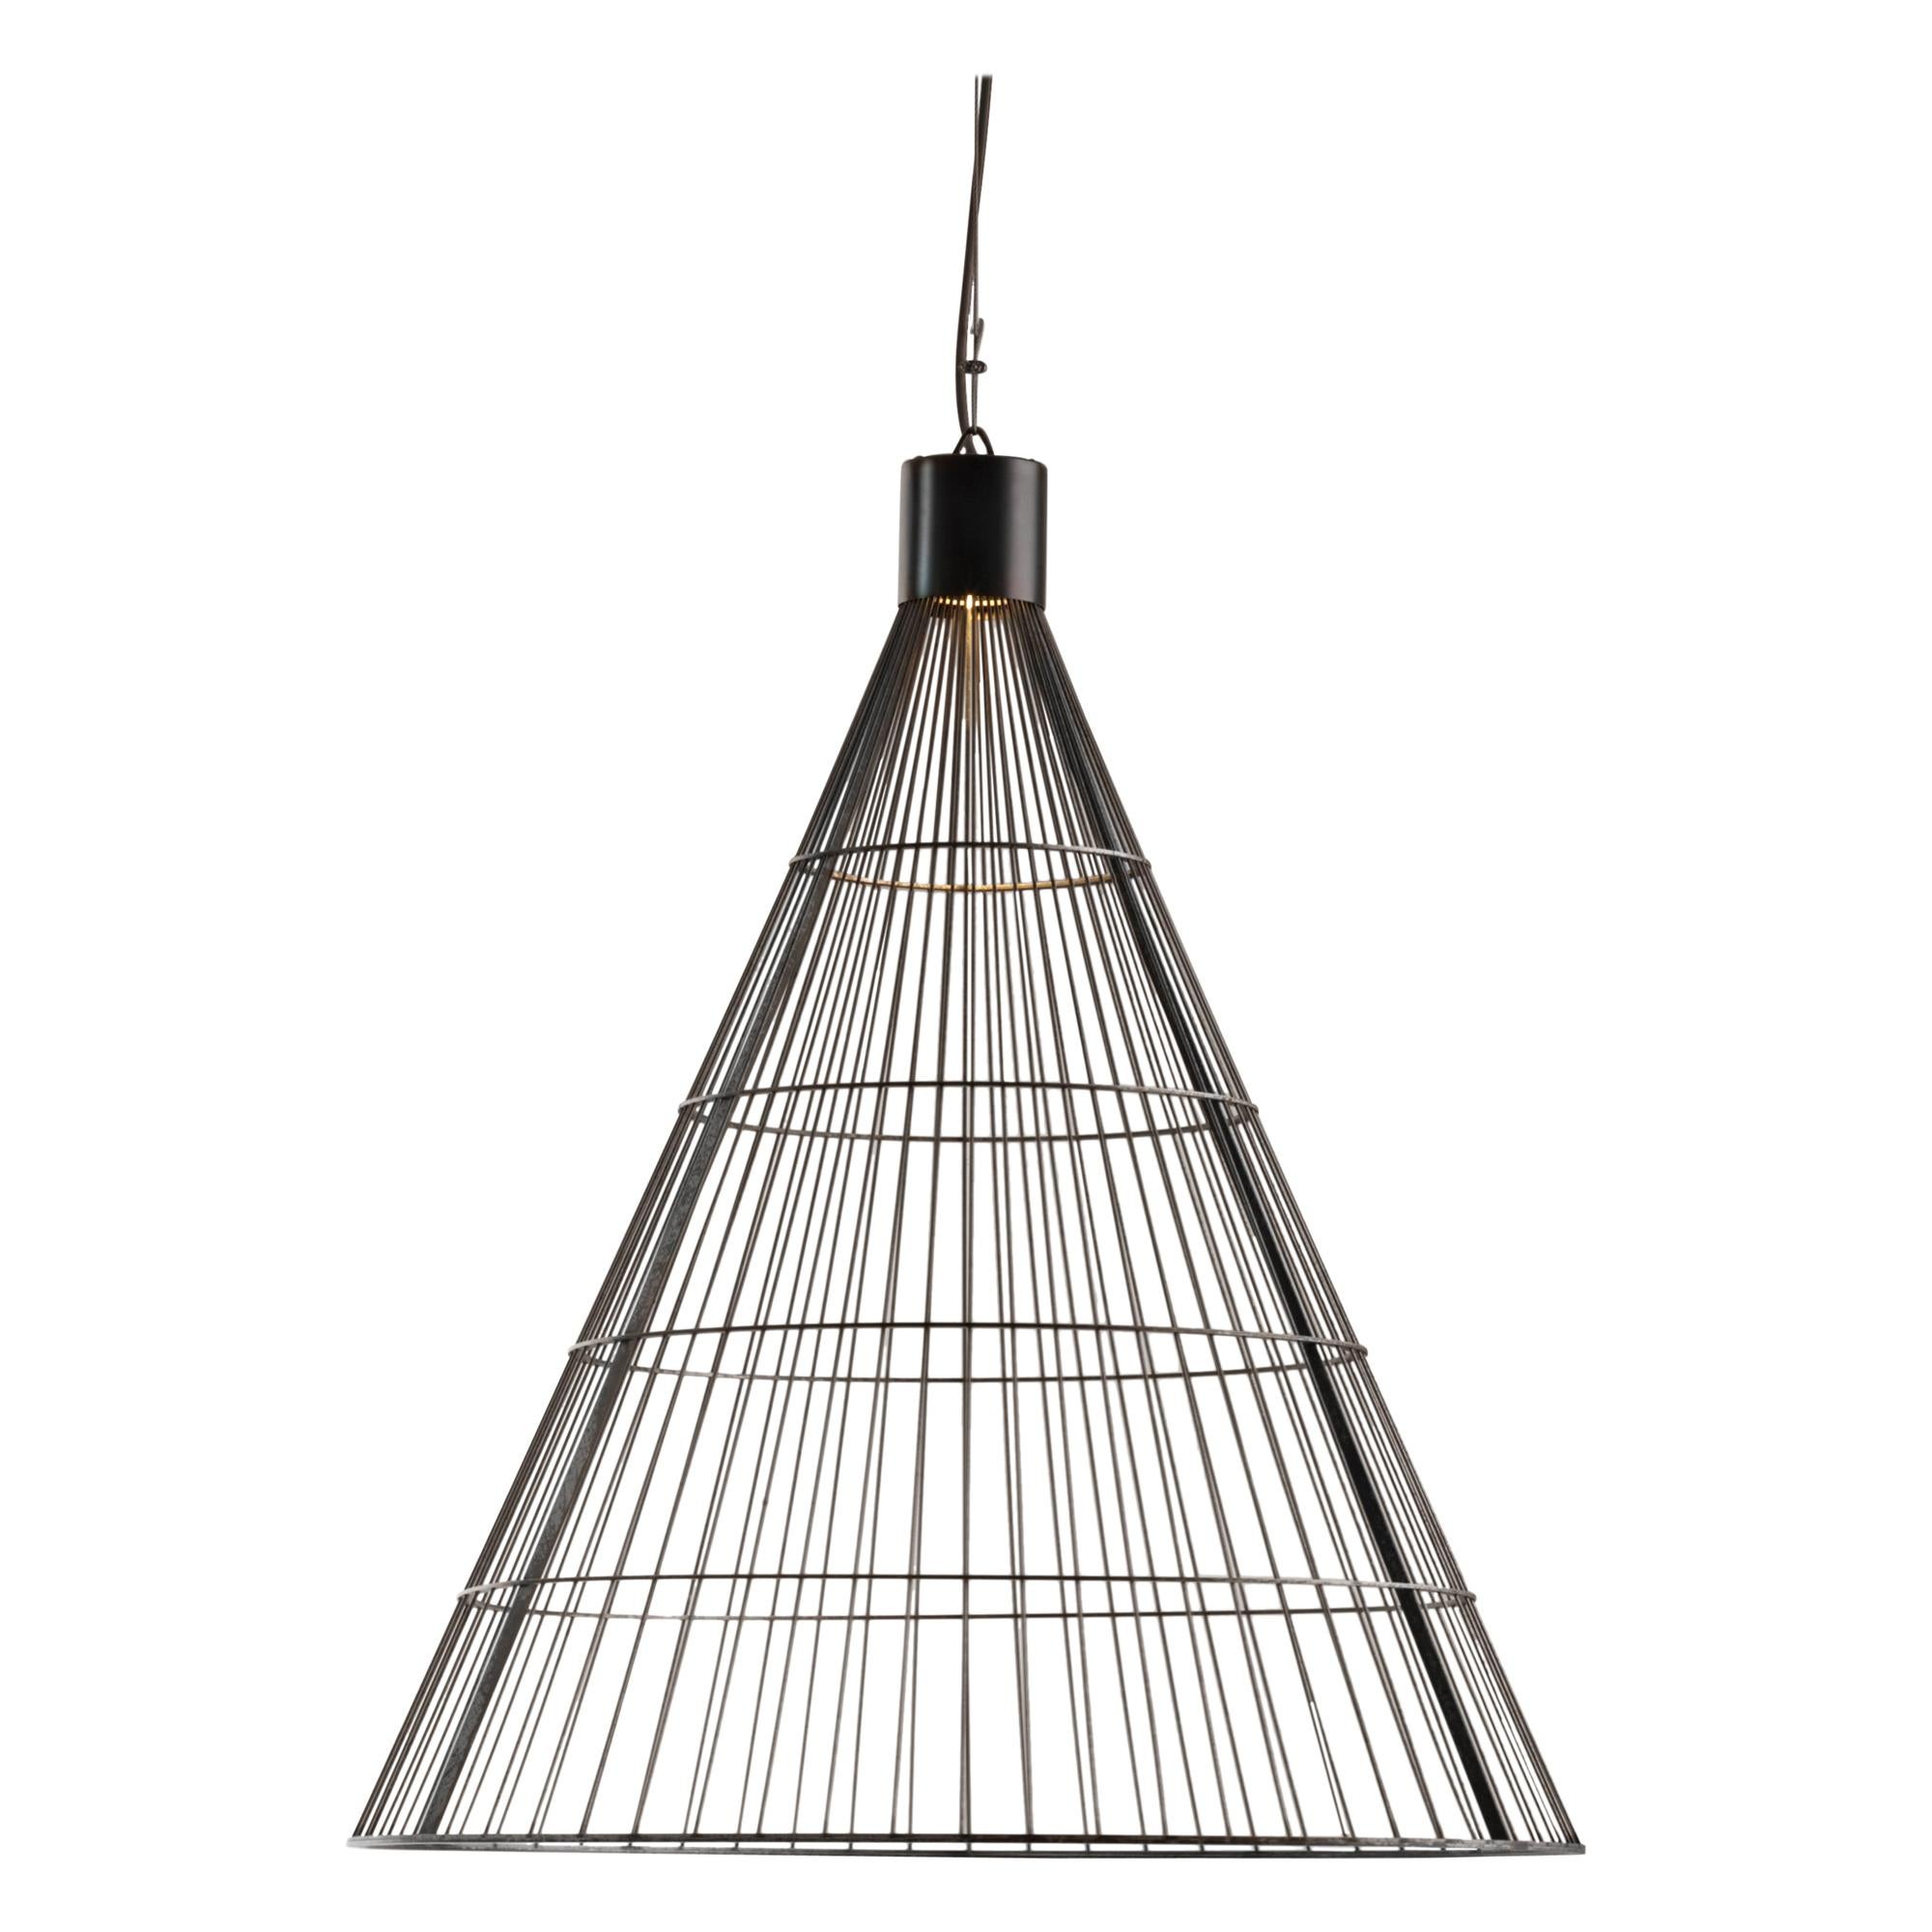 DeCastelli Luce Solida 88 Chandelier in Iron by Gumdesign For Sale